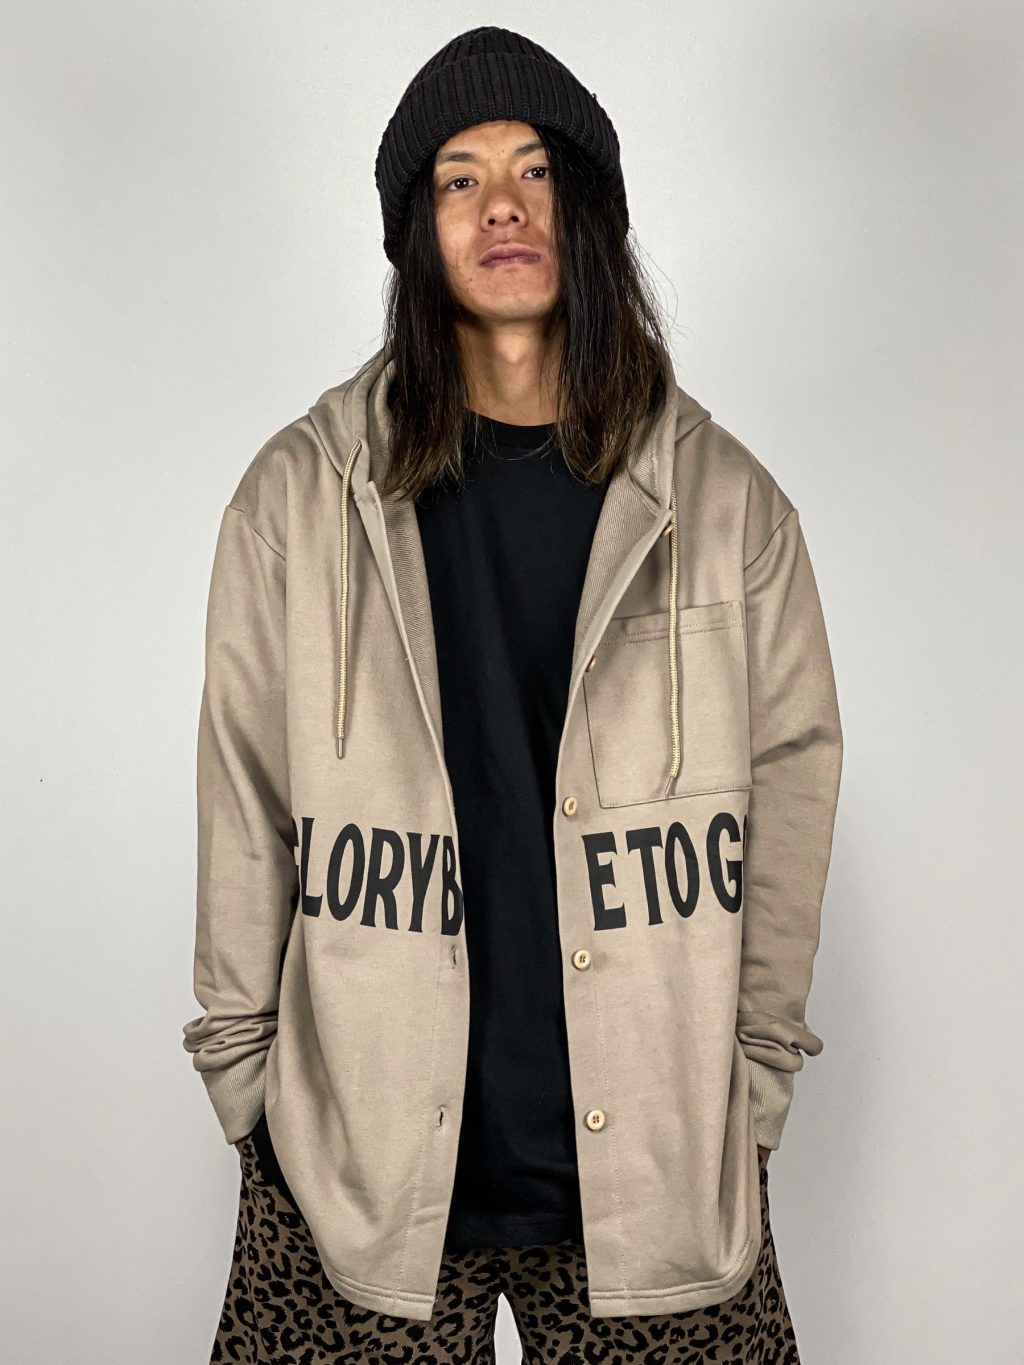 example-20ss-lookbook-launch-20200222